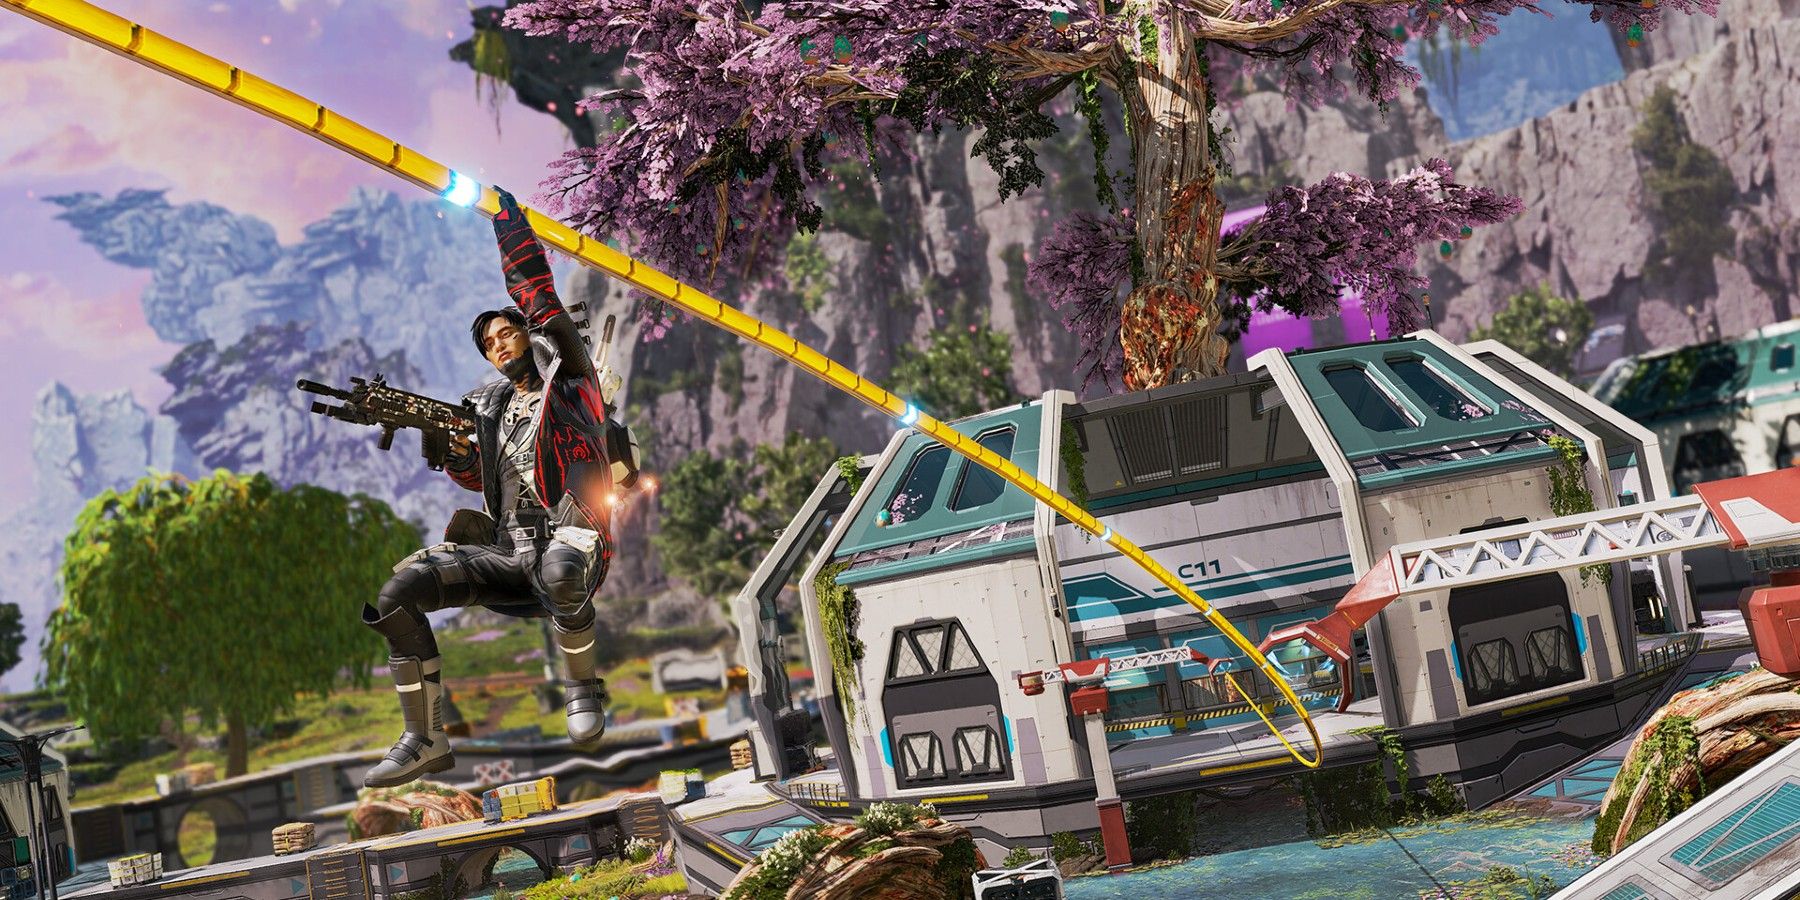 The Apex Legends player earns 14 kills without firing a weapon